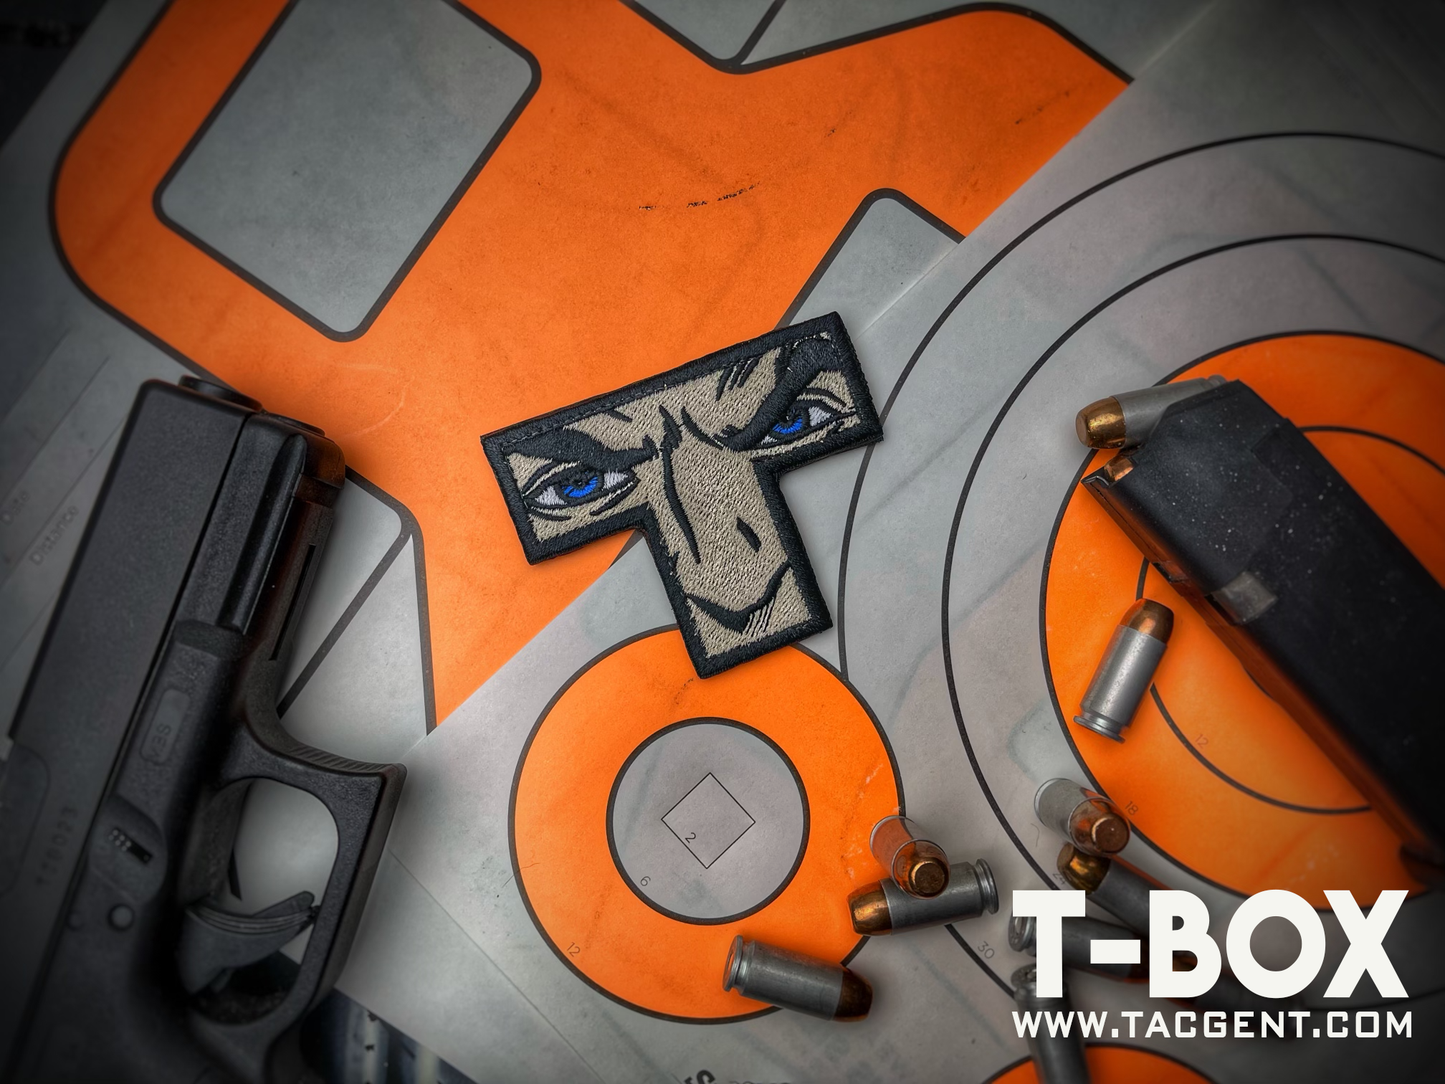 T-Box Patch & 4 Decal Set